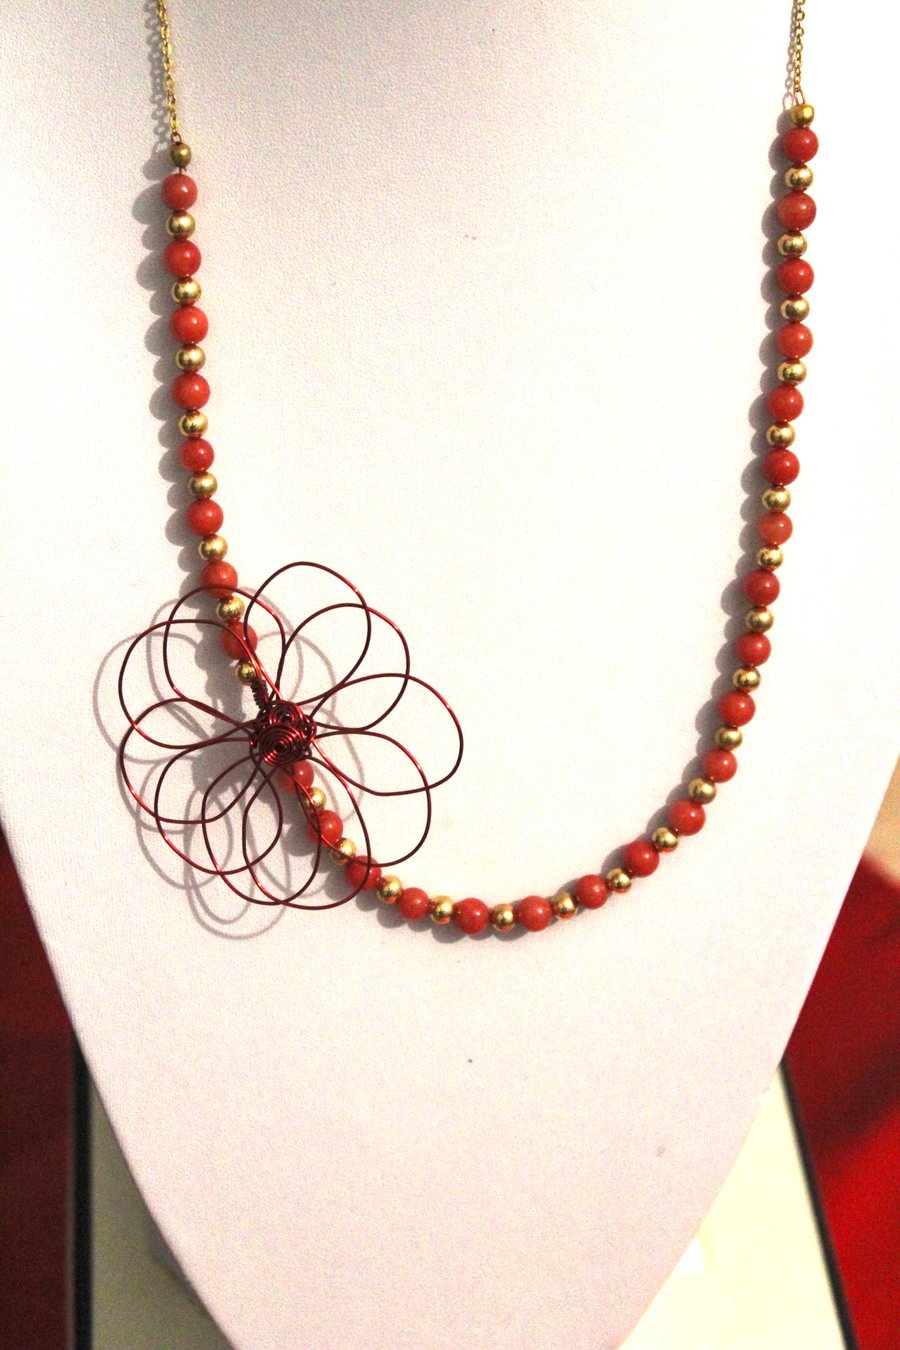 Beaded necklace with wire flower accent 